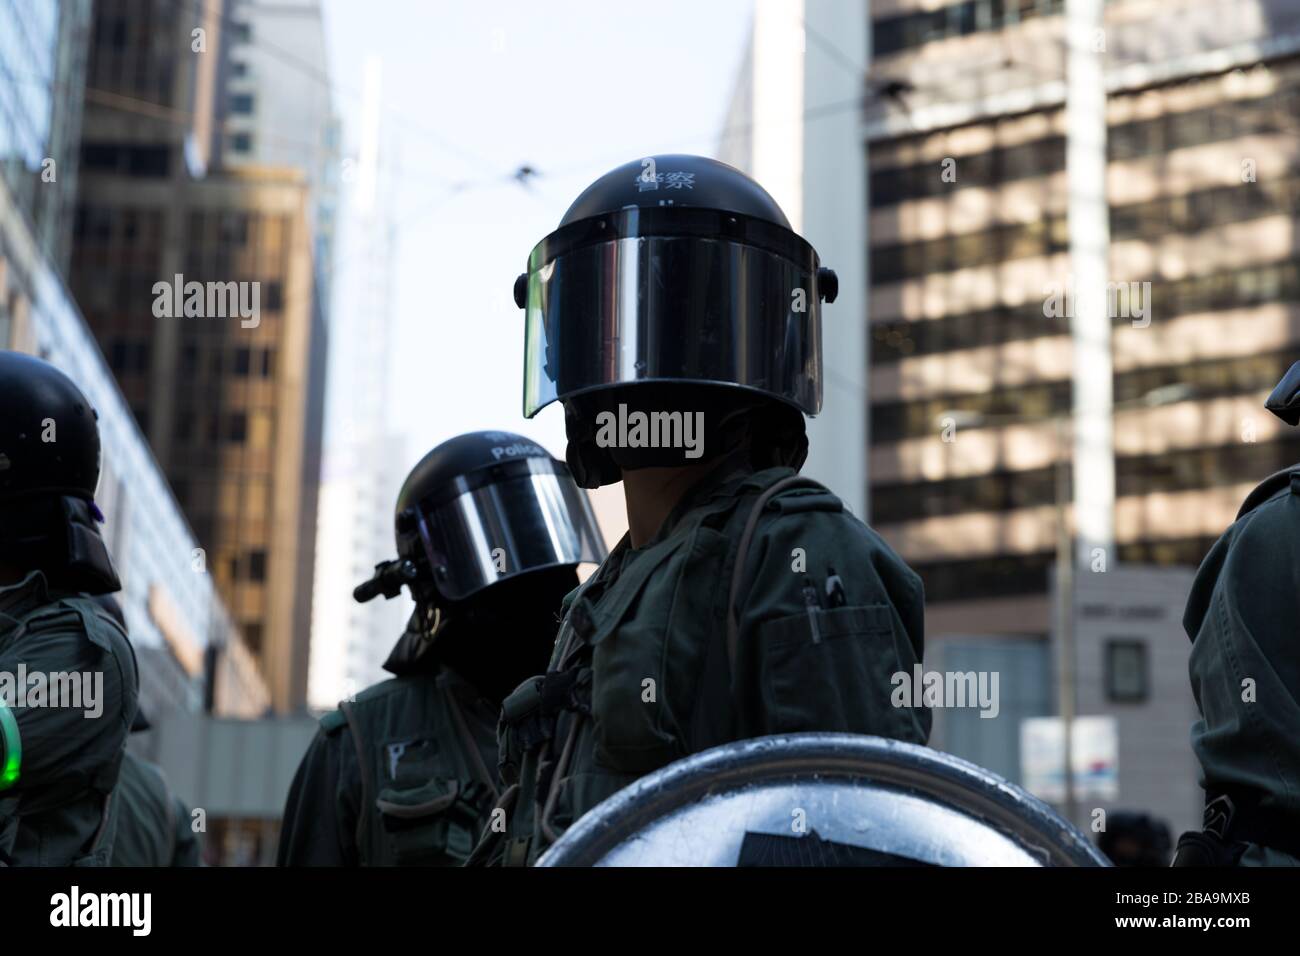 Police Officer in Central, Hong Kong during the protests. Stock Photo